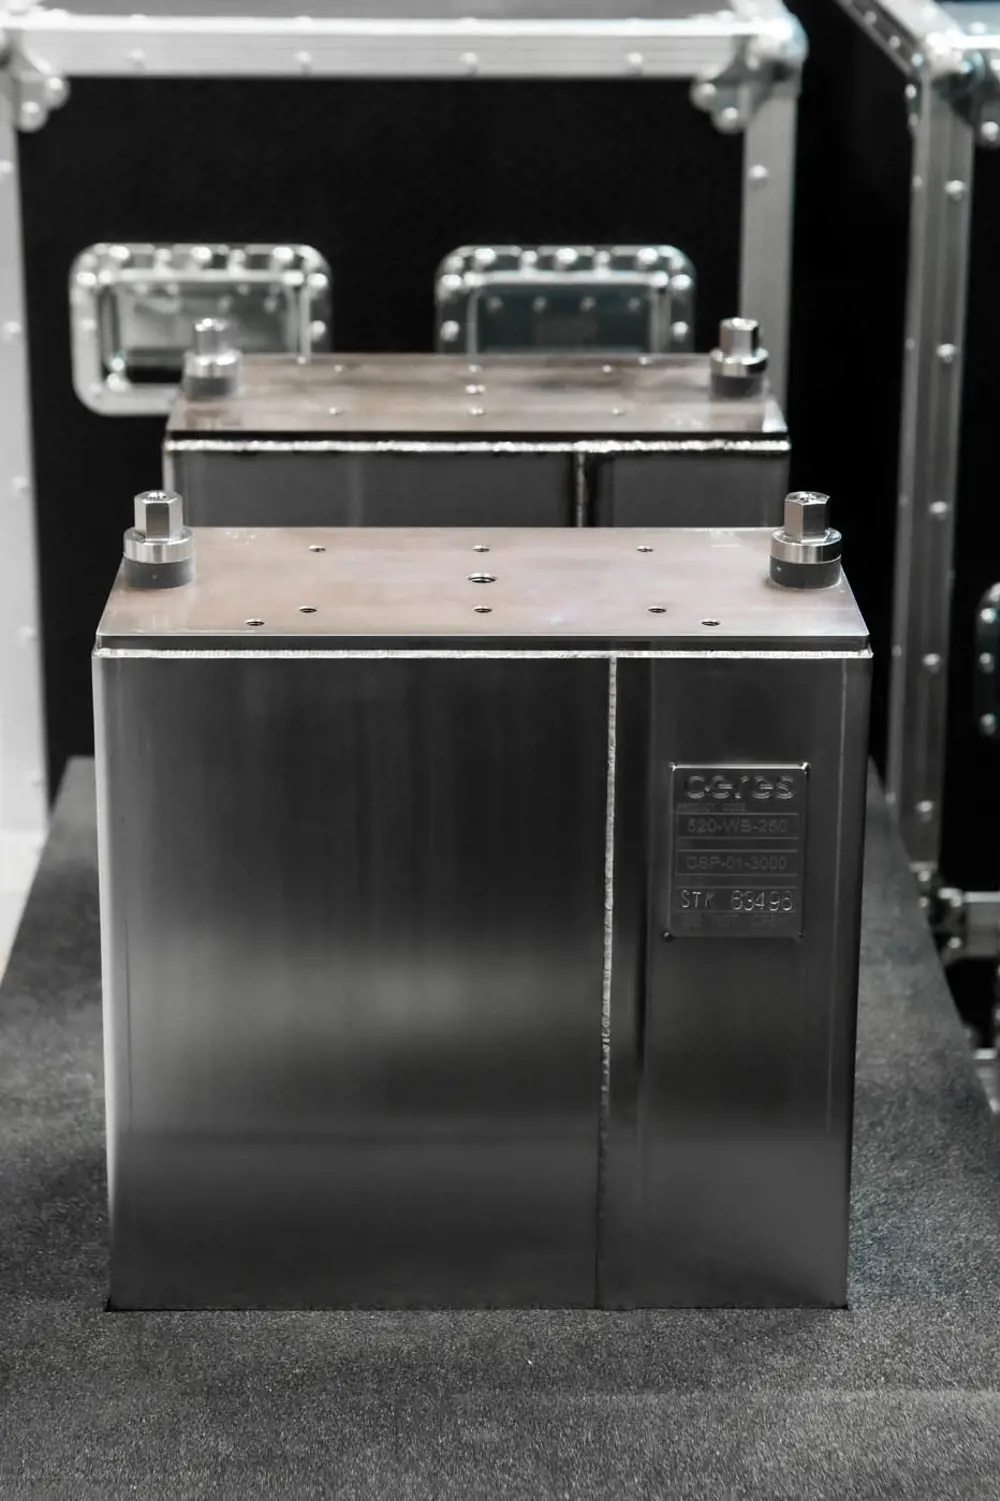 A 5 kilowatt stack of Ceres Power's fuel cells, encapsulated in a metal container.